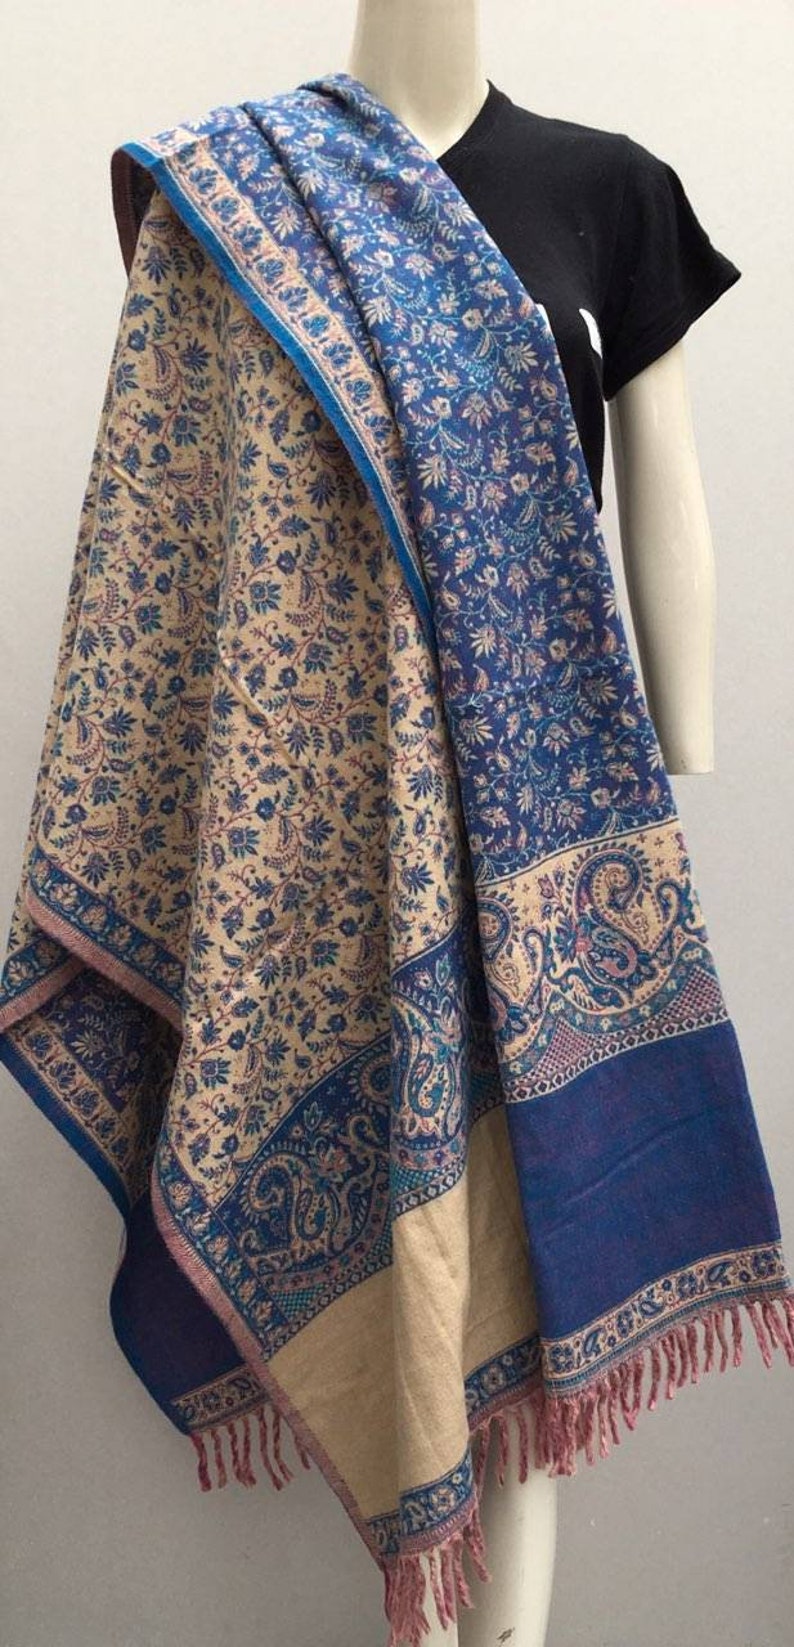 Real yak wool shawl/himalayan made purple,blue/beige COLOUR paisley floral print ethnic DOUBLE sided scarf/wrap/blanket,High quality gift zdjęcie 3